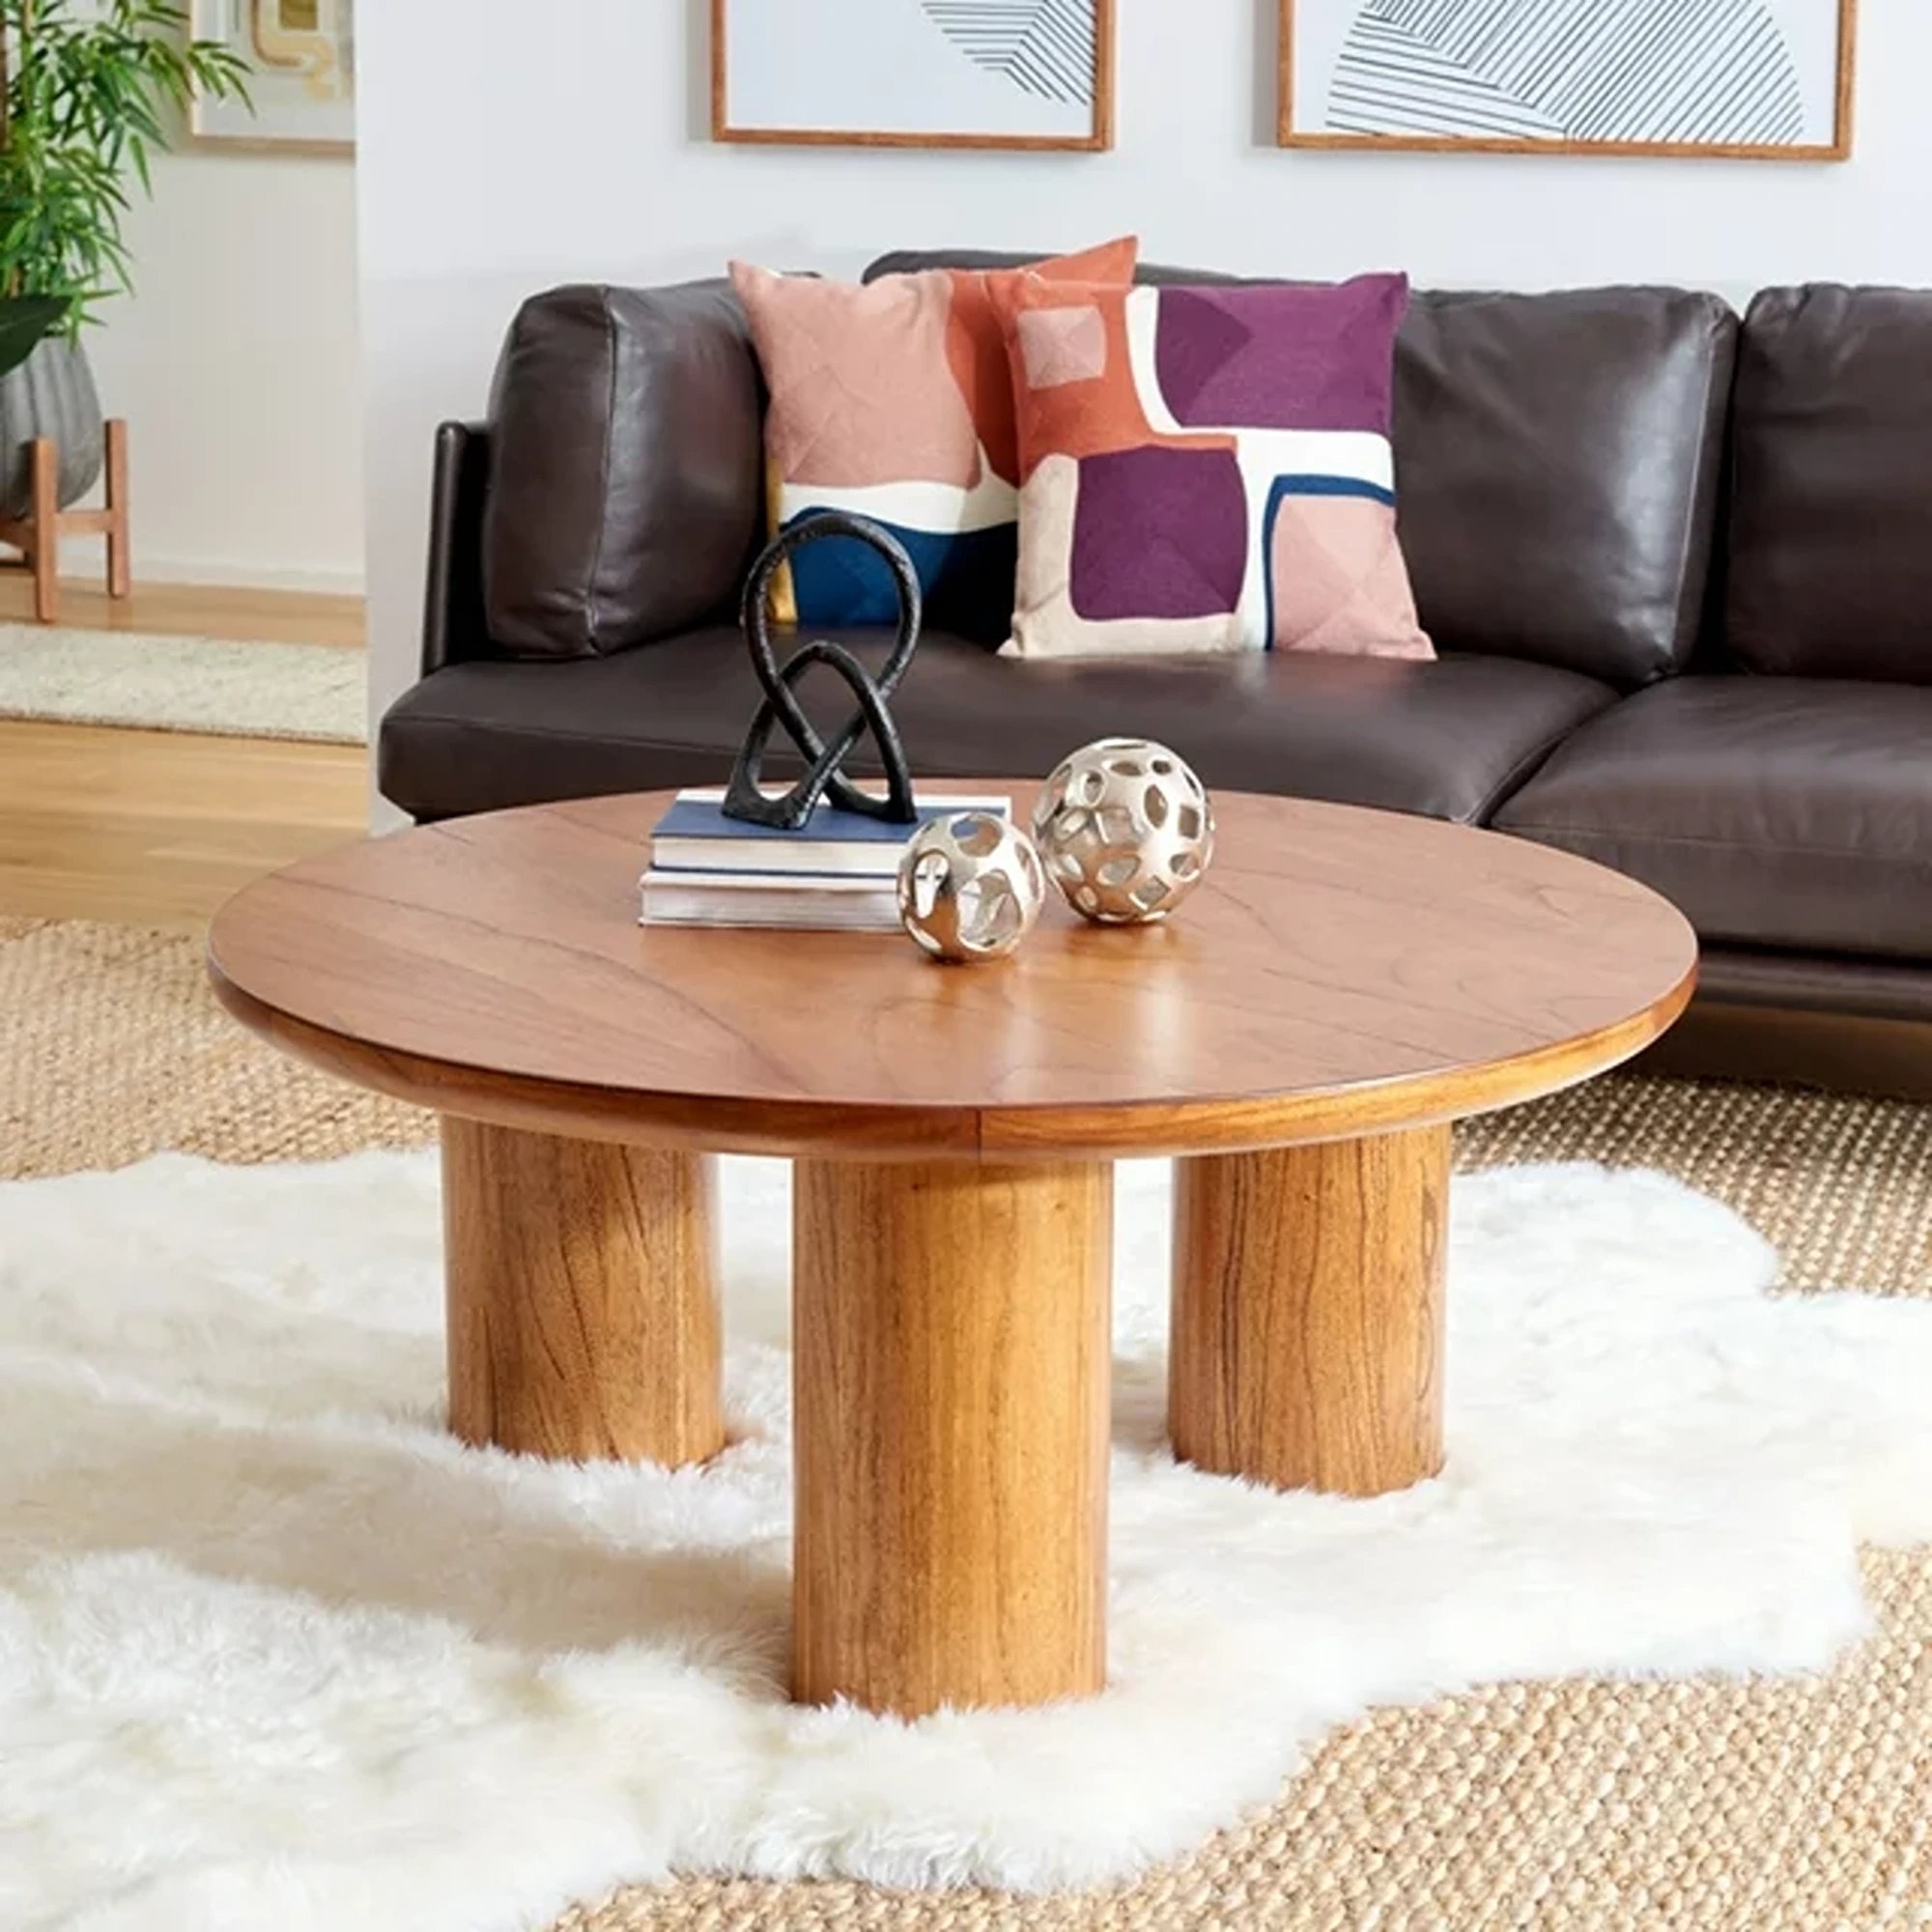 Wooden coffee table with decorative items and a fluffy white rug in a cozy living room setting